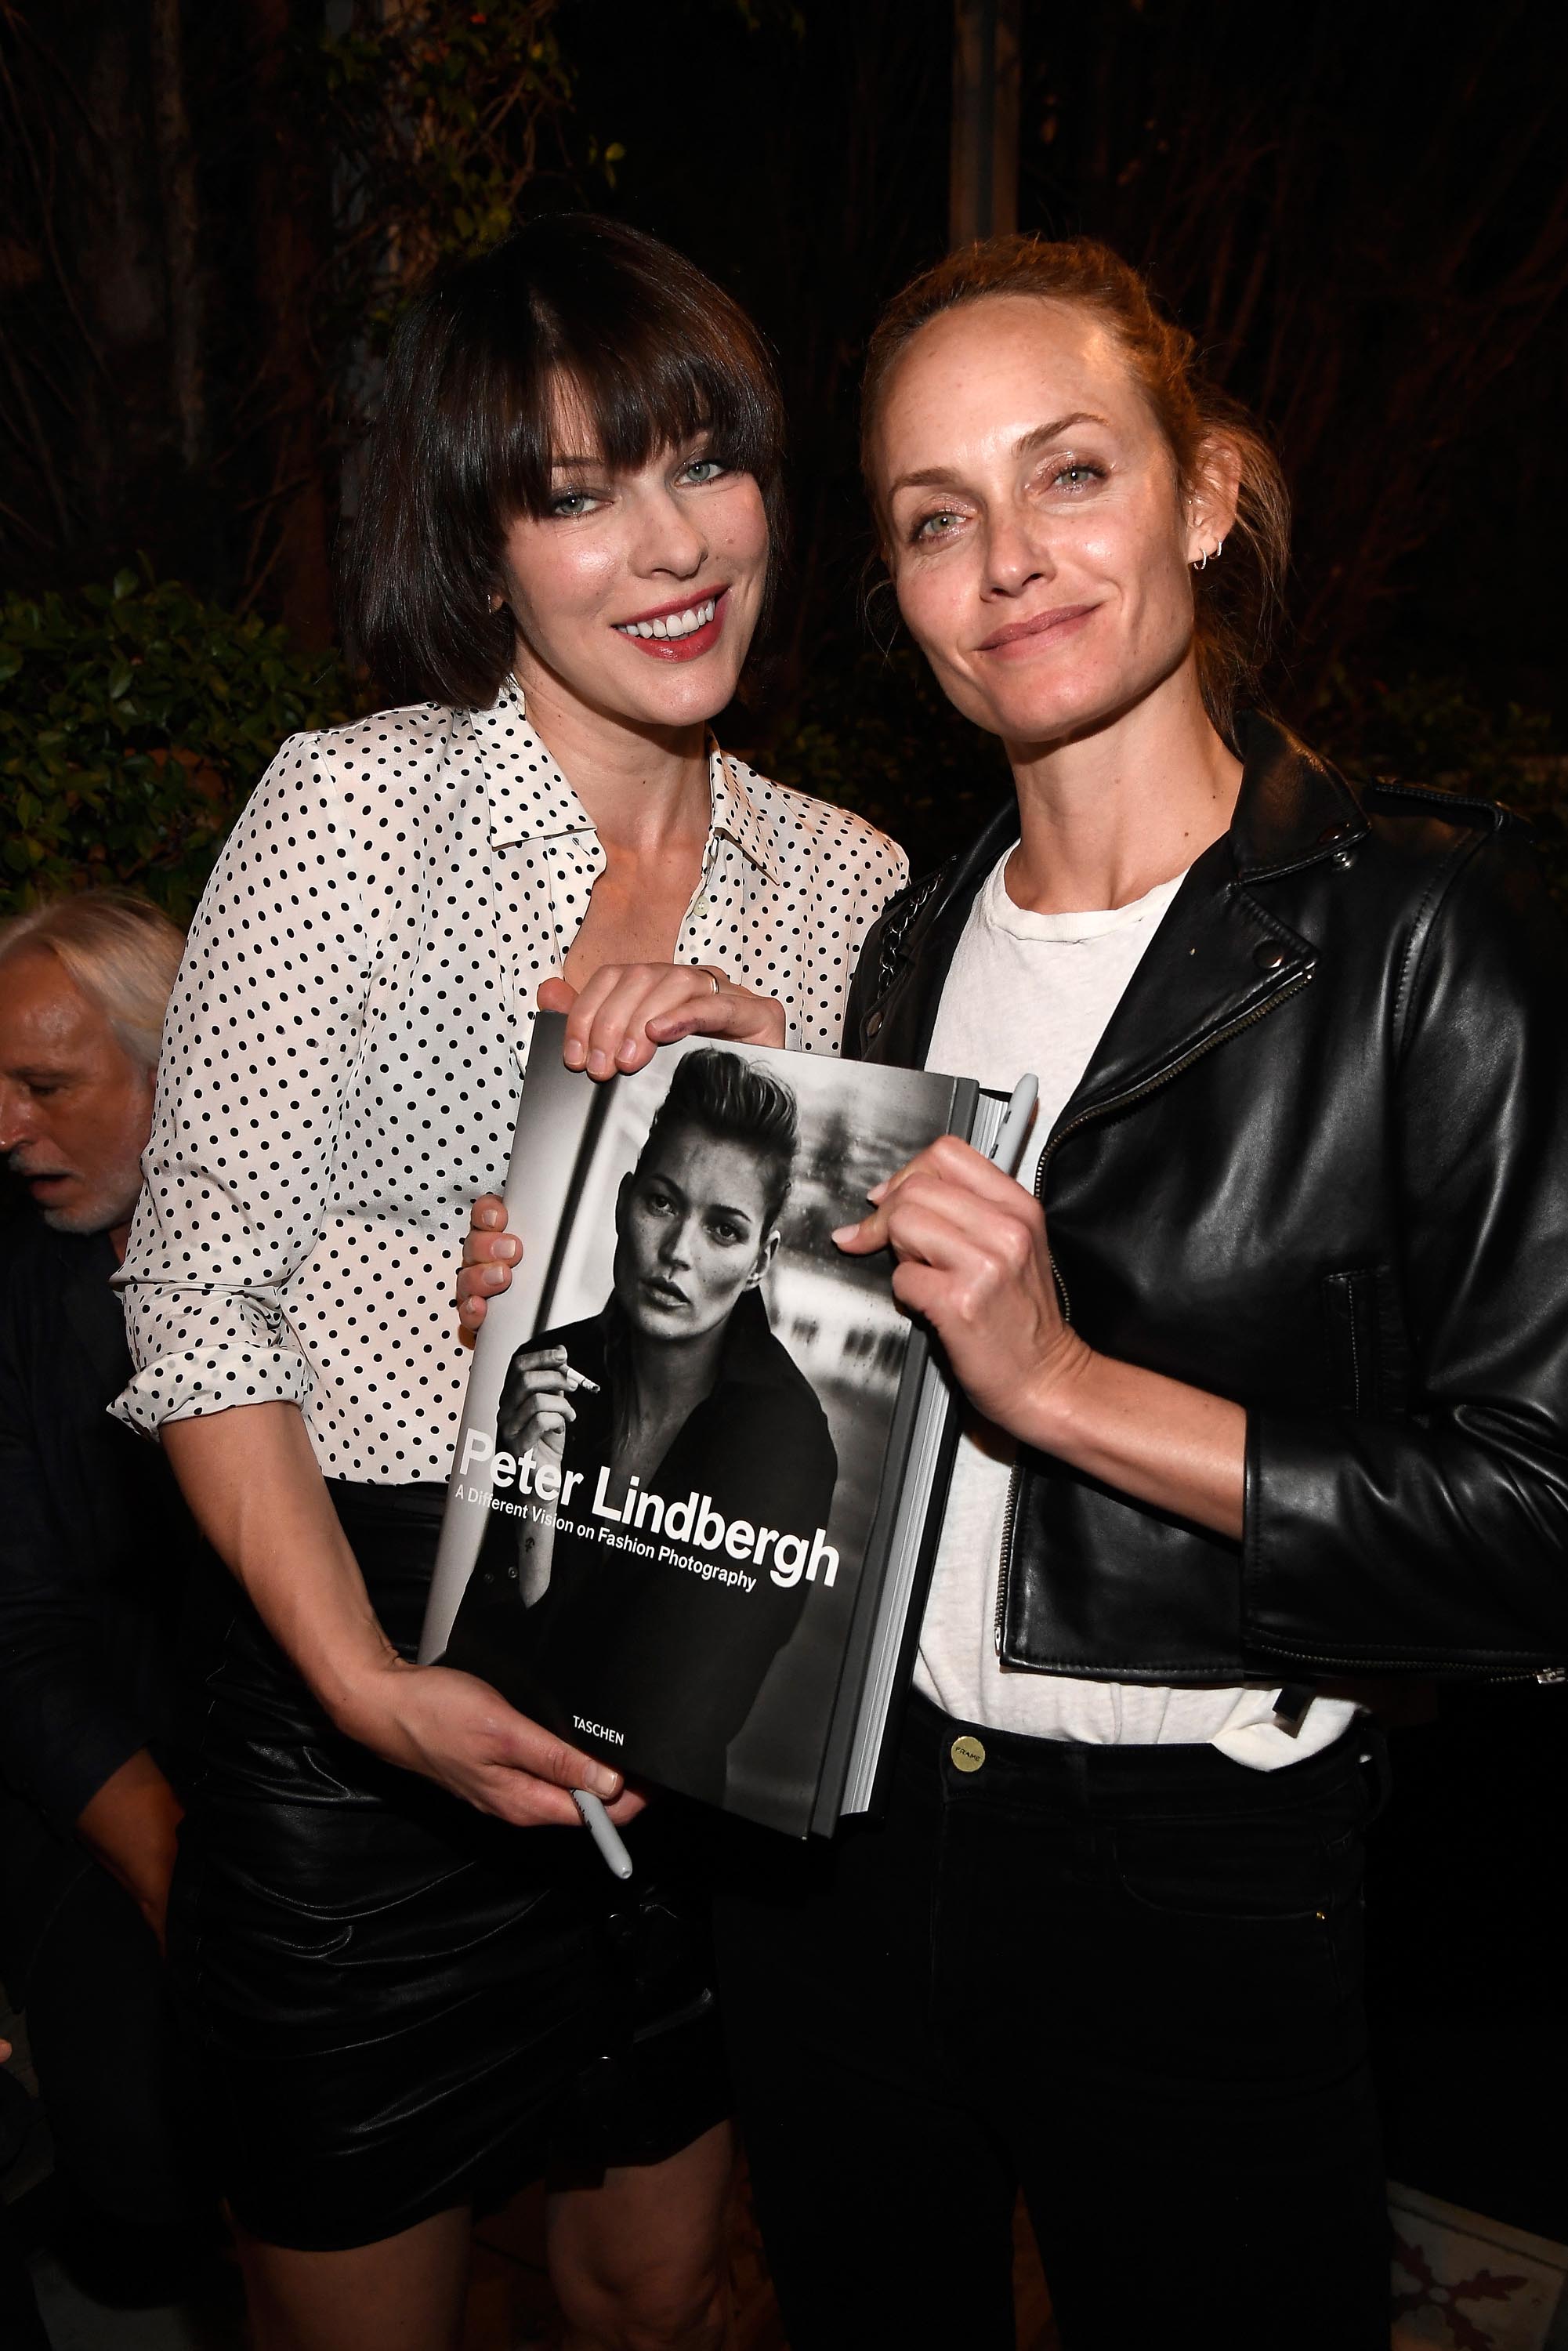 Milla Jovovich attends photographer Peter Lindbergh Book Signing